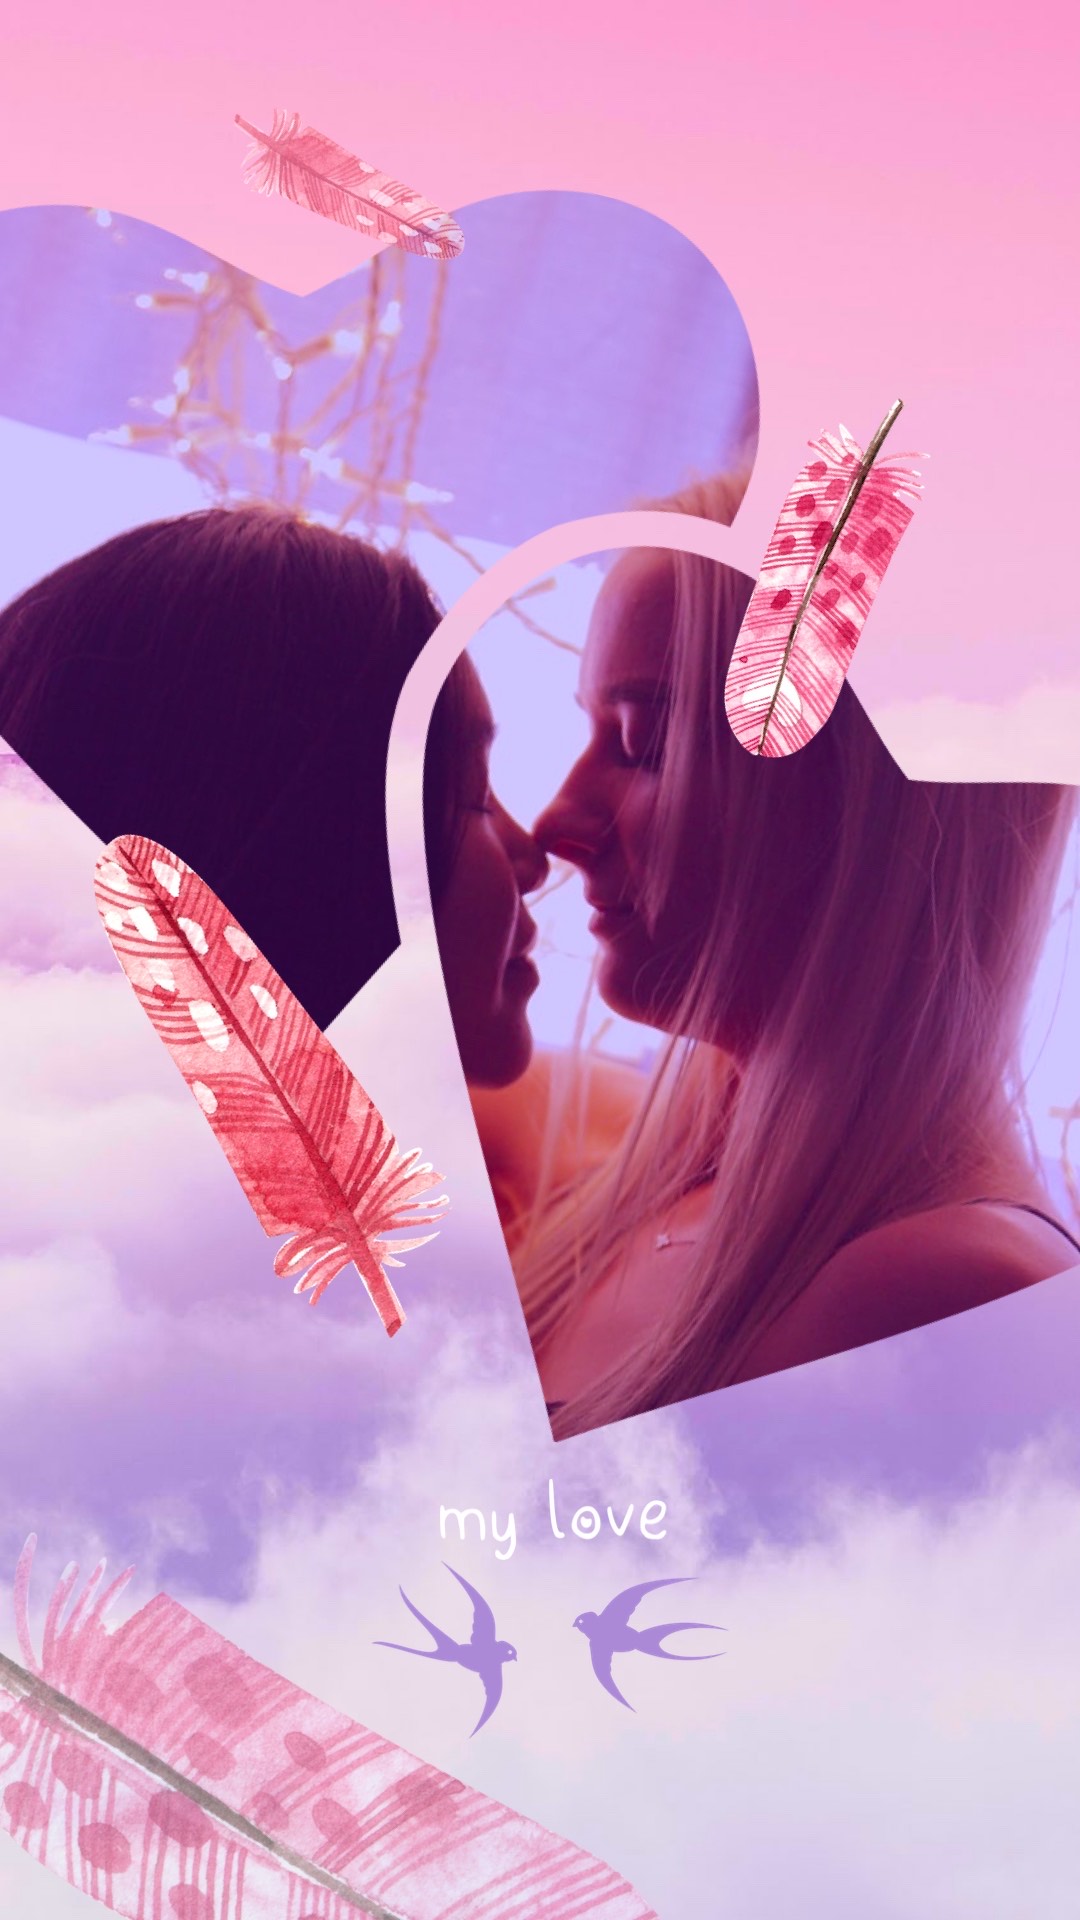 A Collage Of Two Women Kissing Each Other Love Story Template